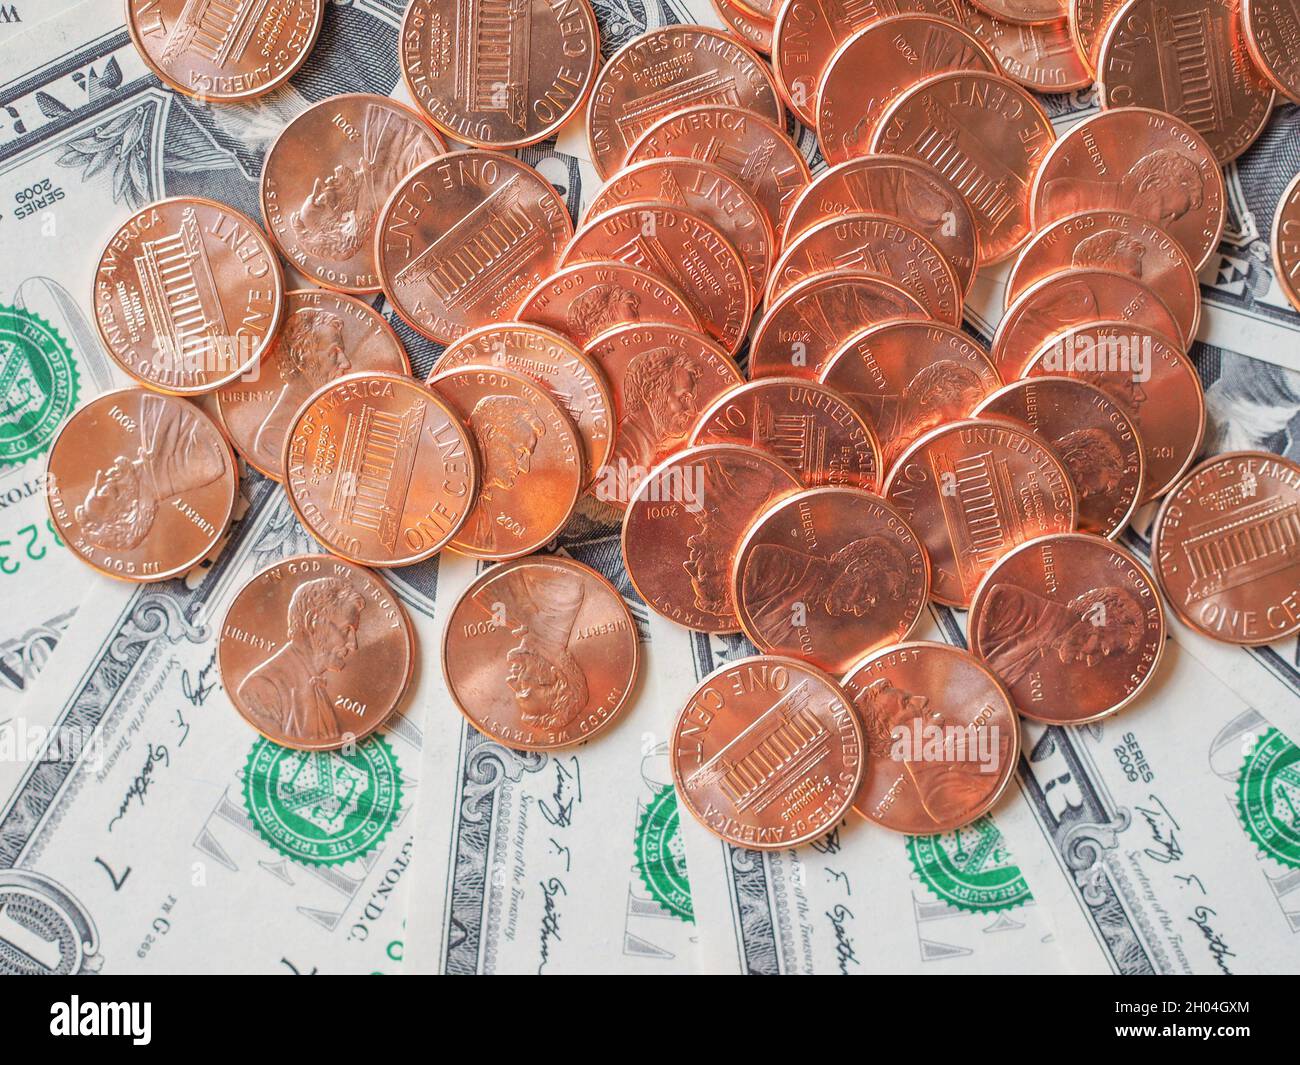 Dollar coins and banknotes currency of the United States useful as a background. Stock Photo